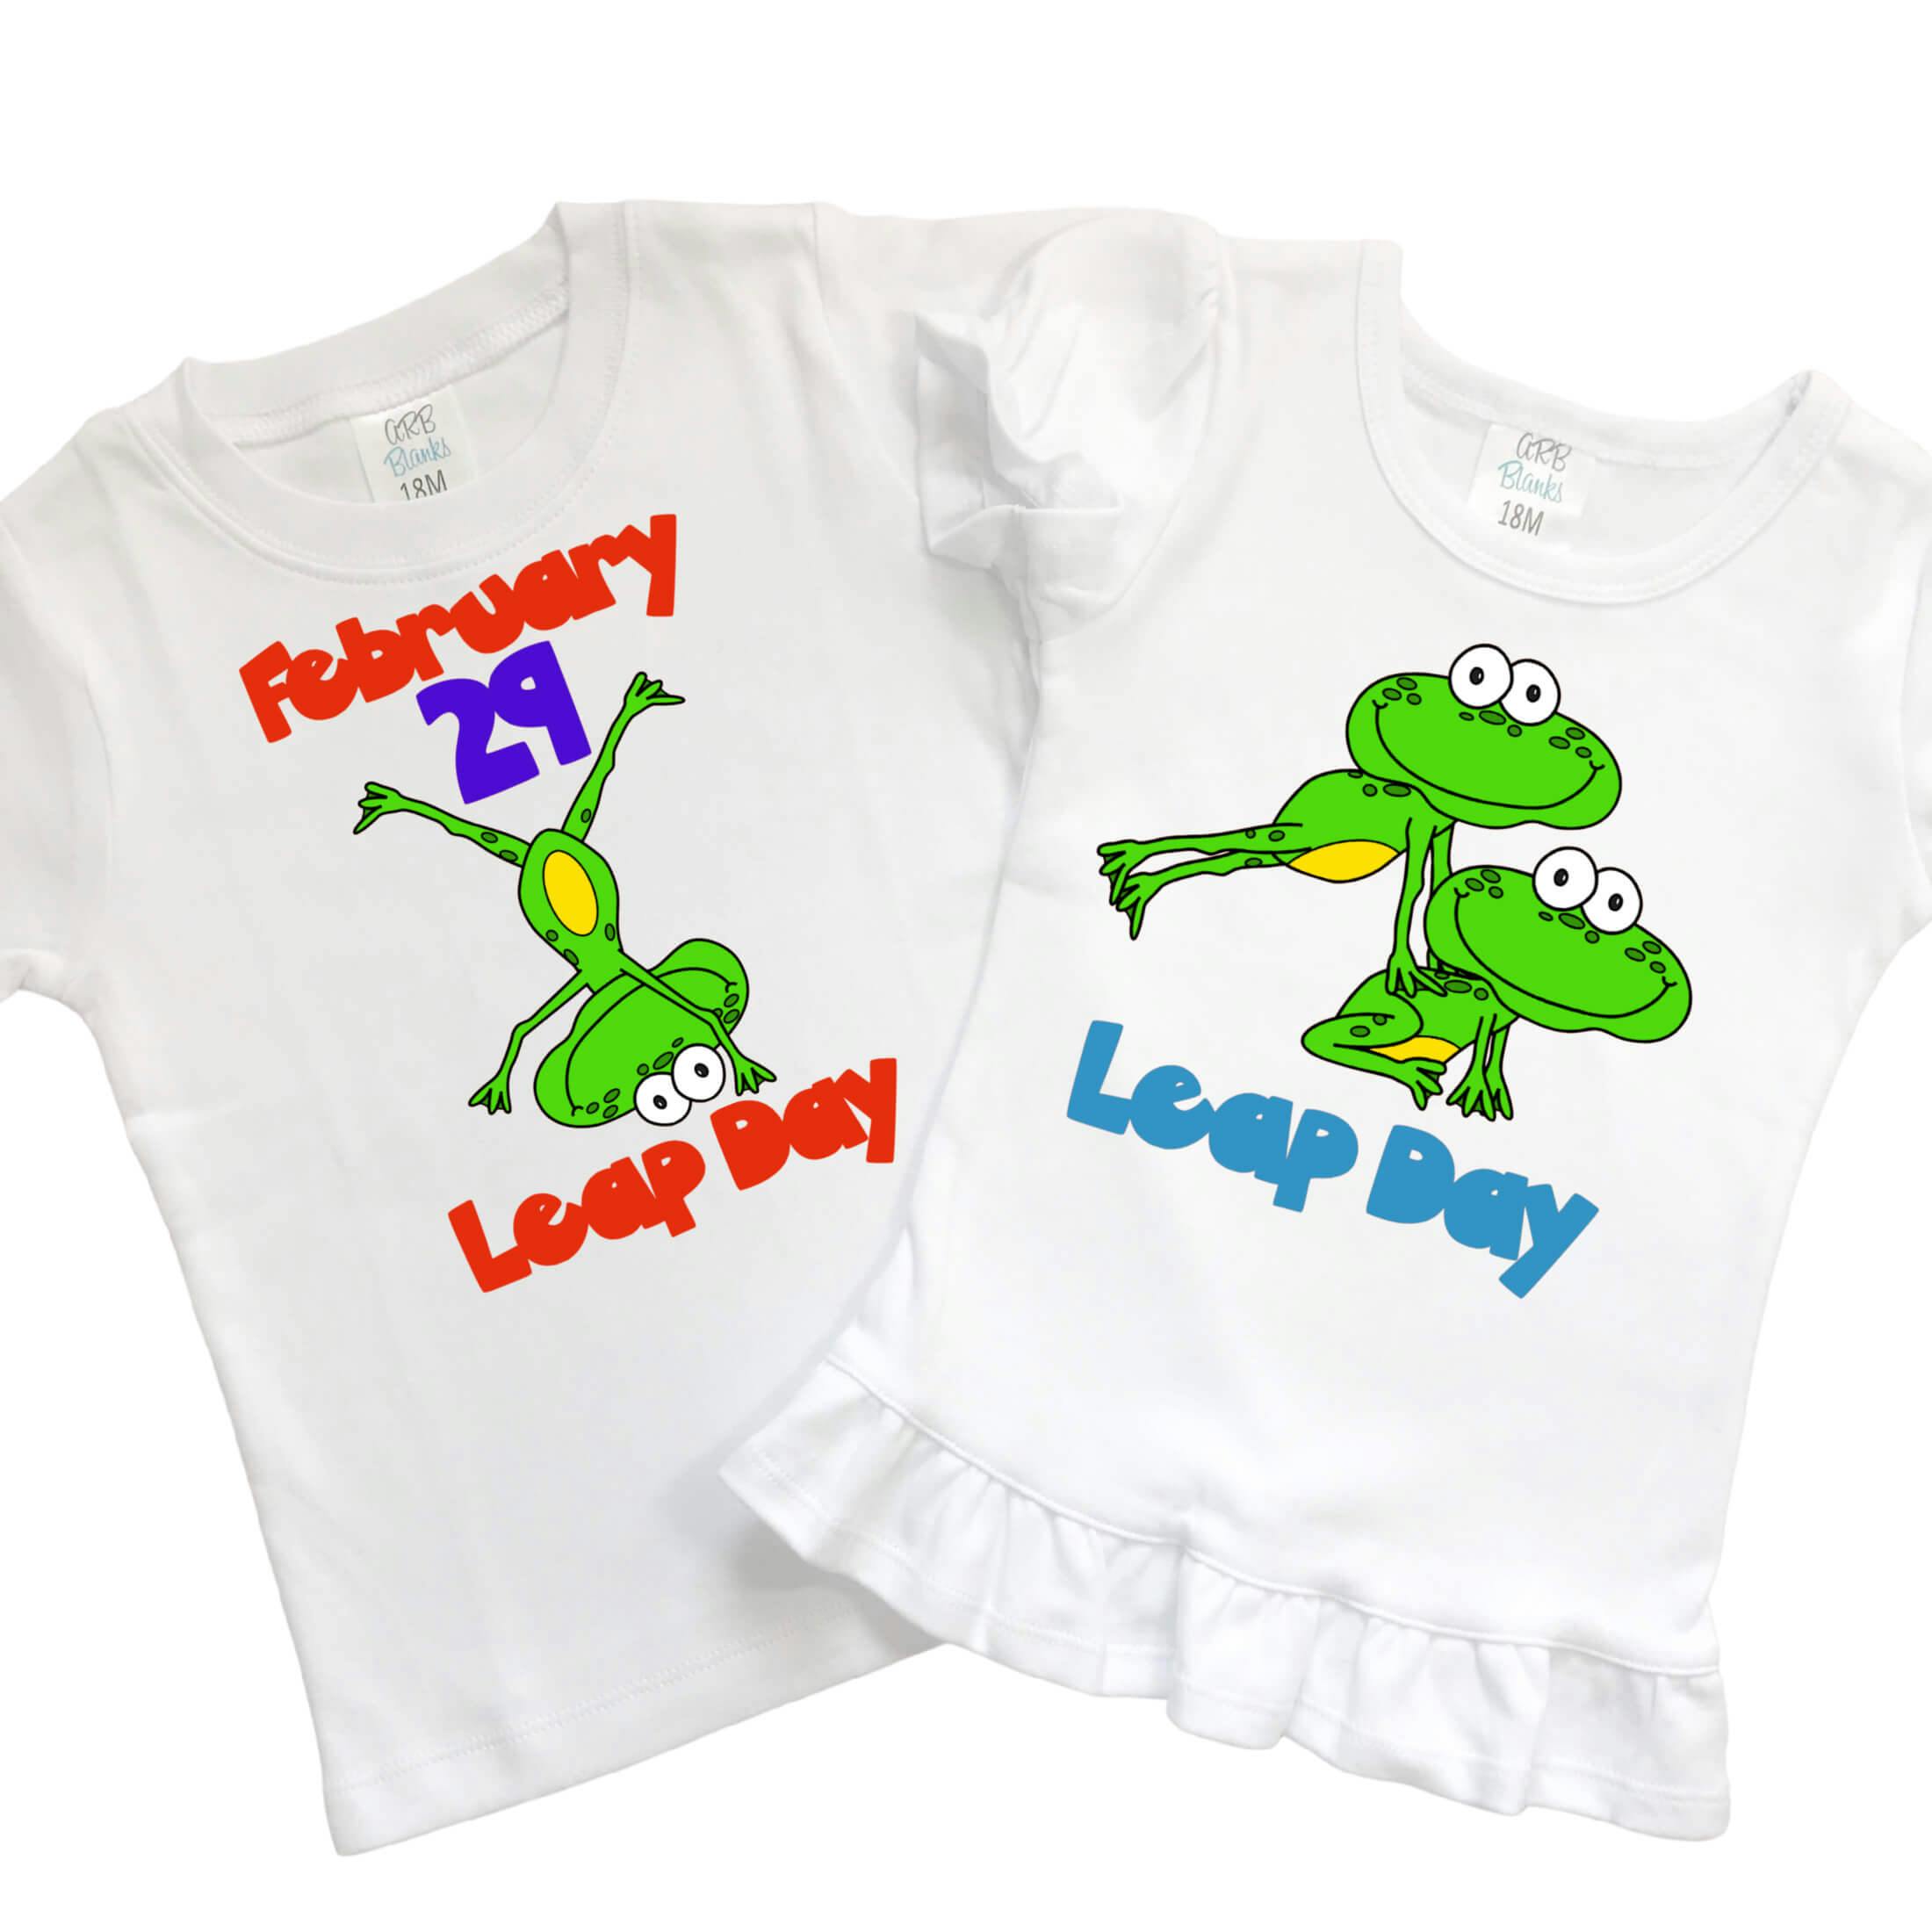 Kids Leap Year Leap Day Tees - undefined - The Sassy Seamstress